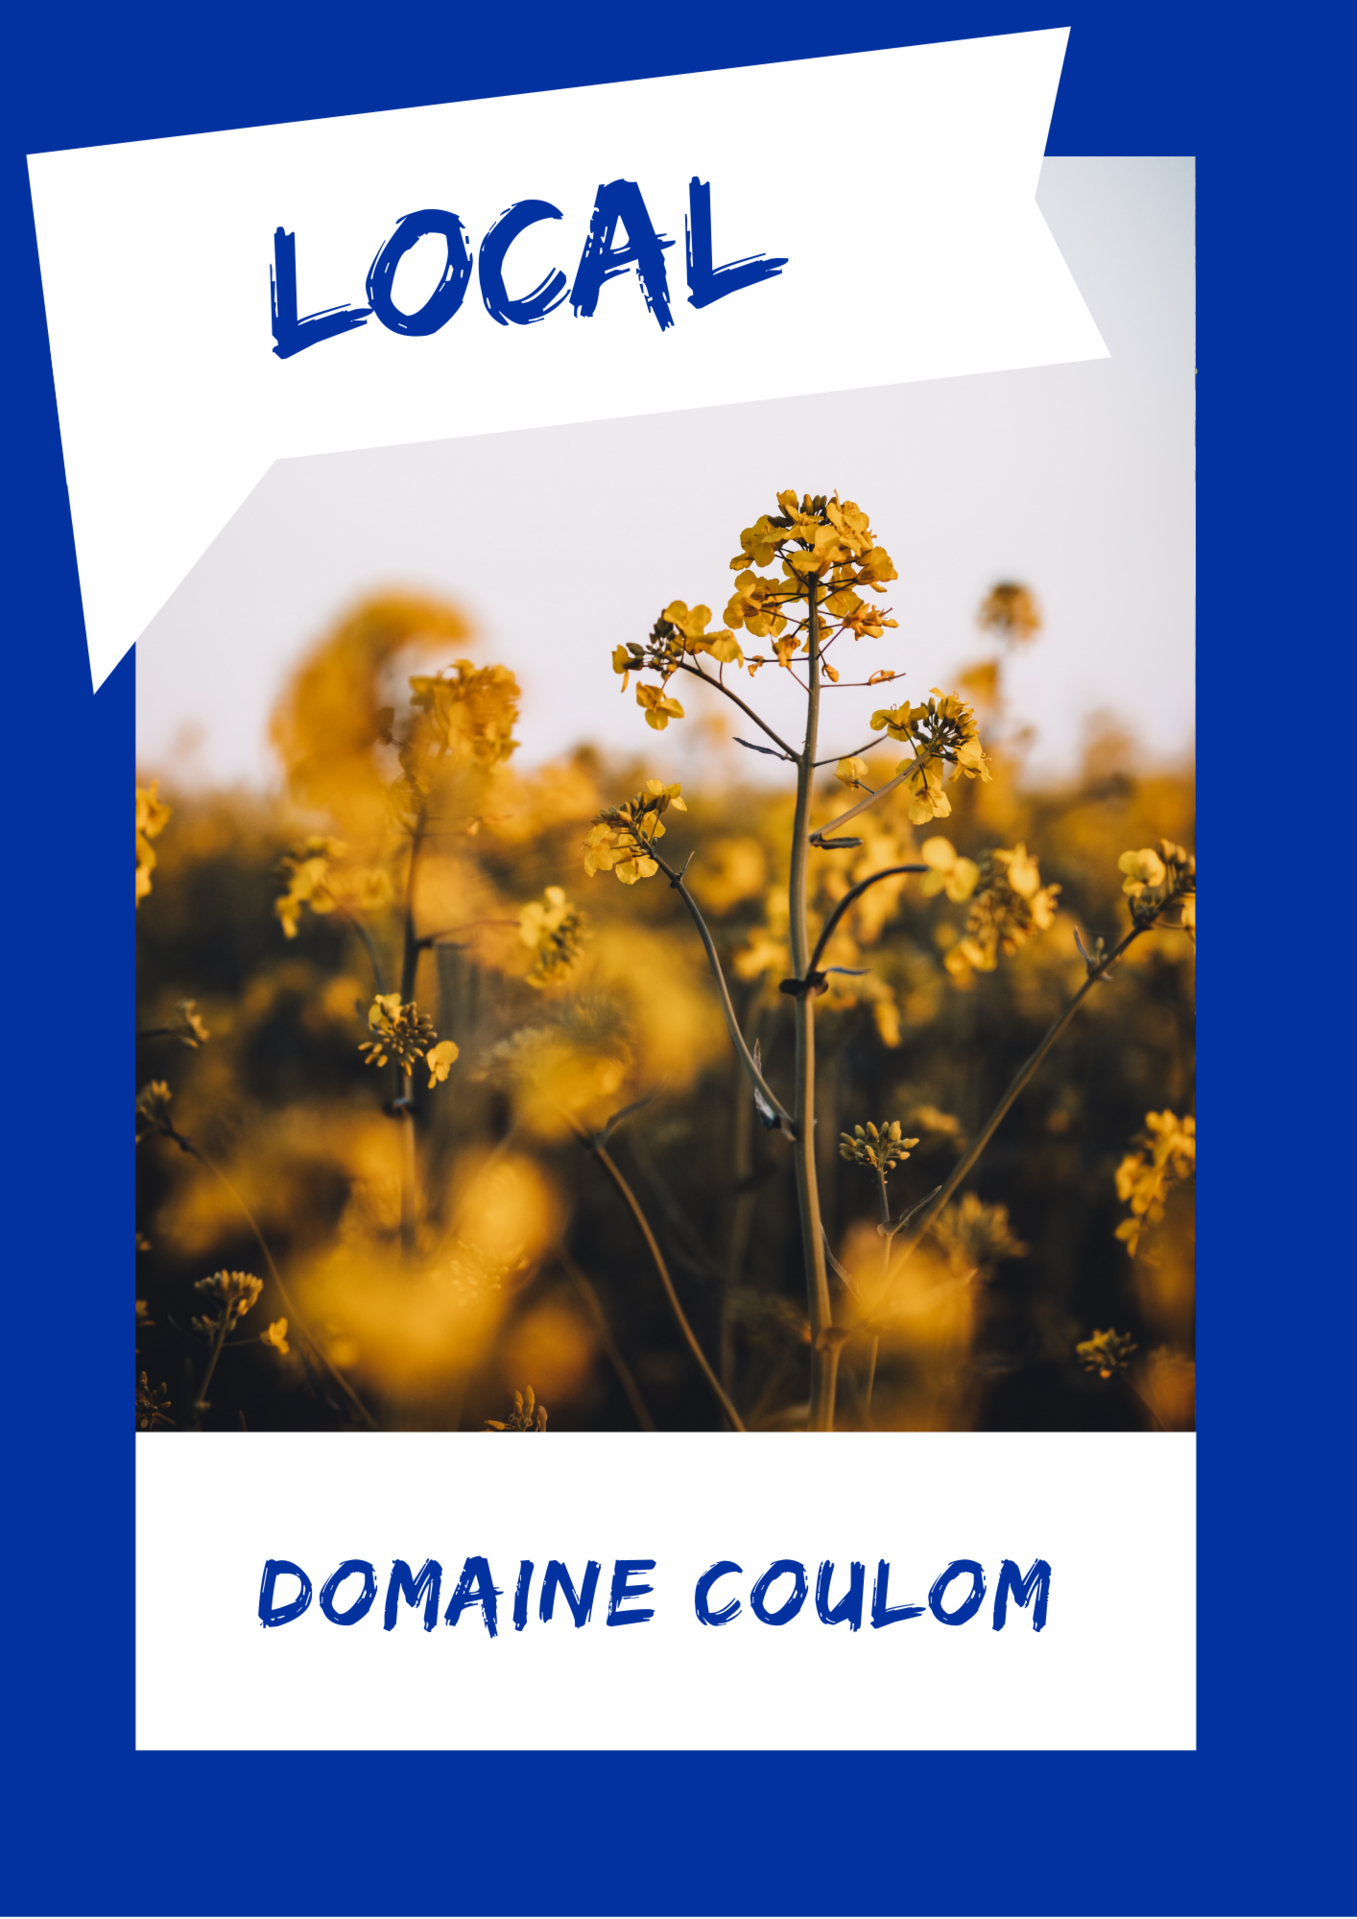 DOMAINE COULOM